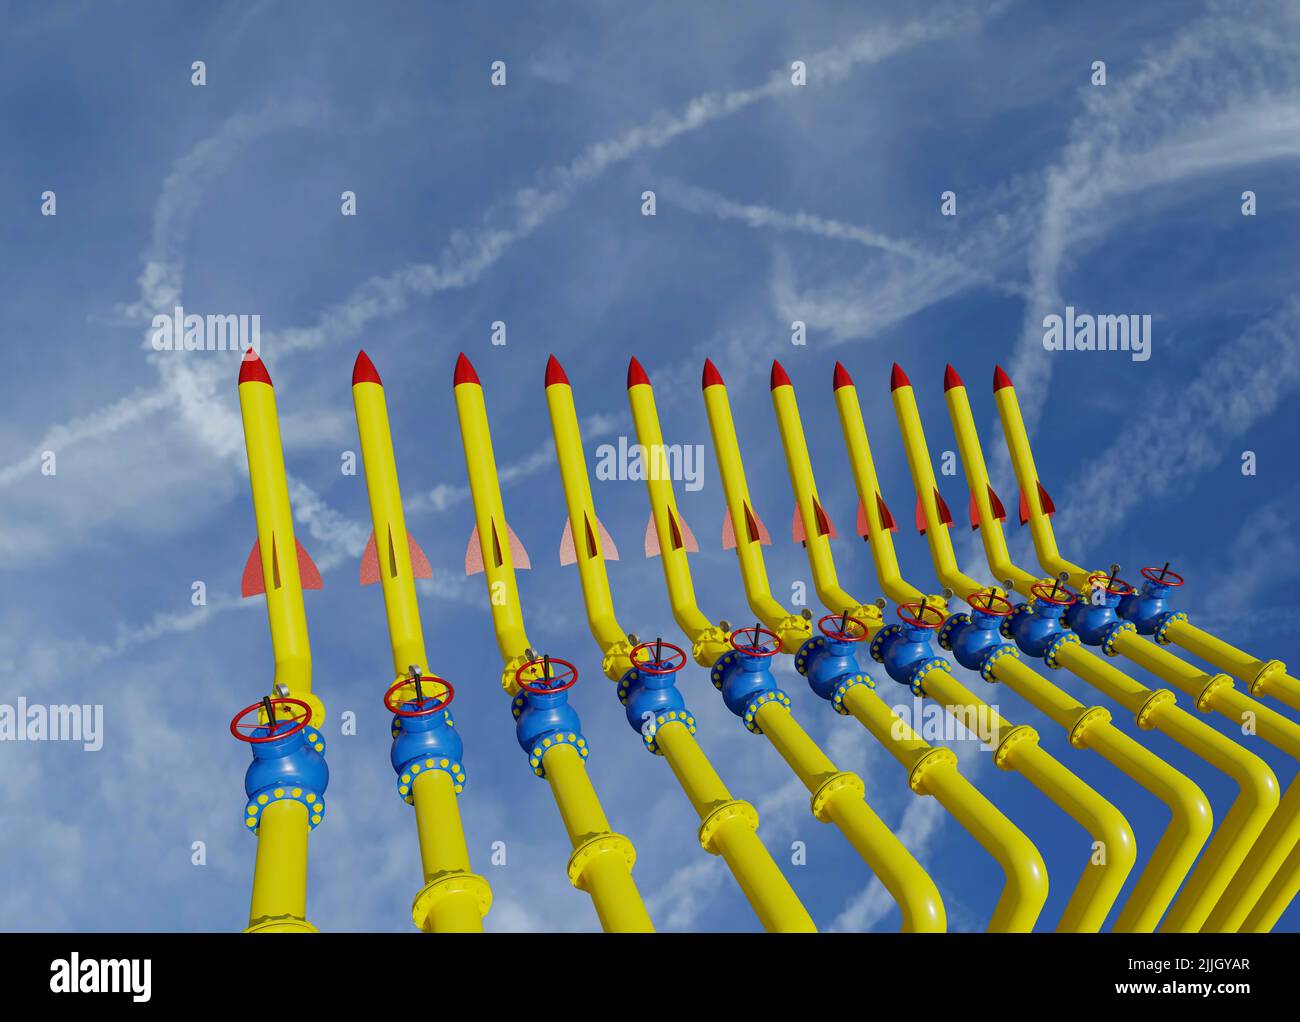 Crisis, gas pipe being turned into weapons, the concept of a threat to Europe's energy security, 3d illustration against the background of the sky Stock Photo